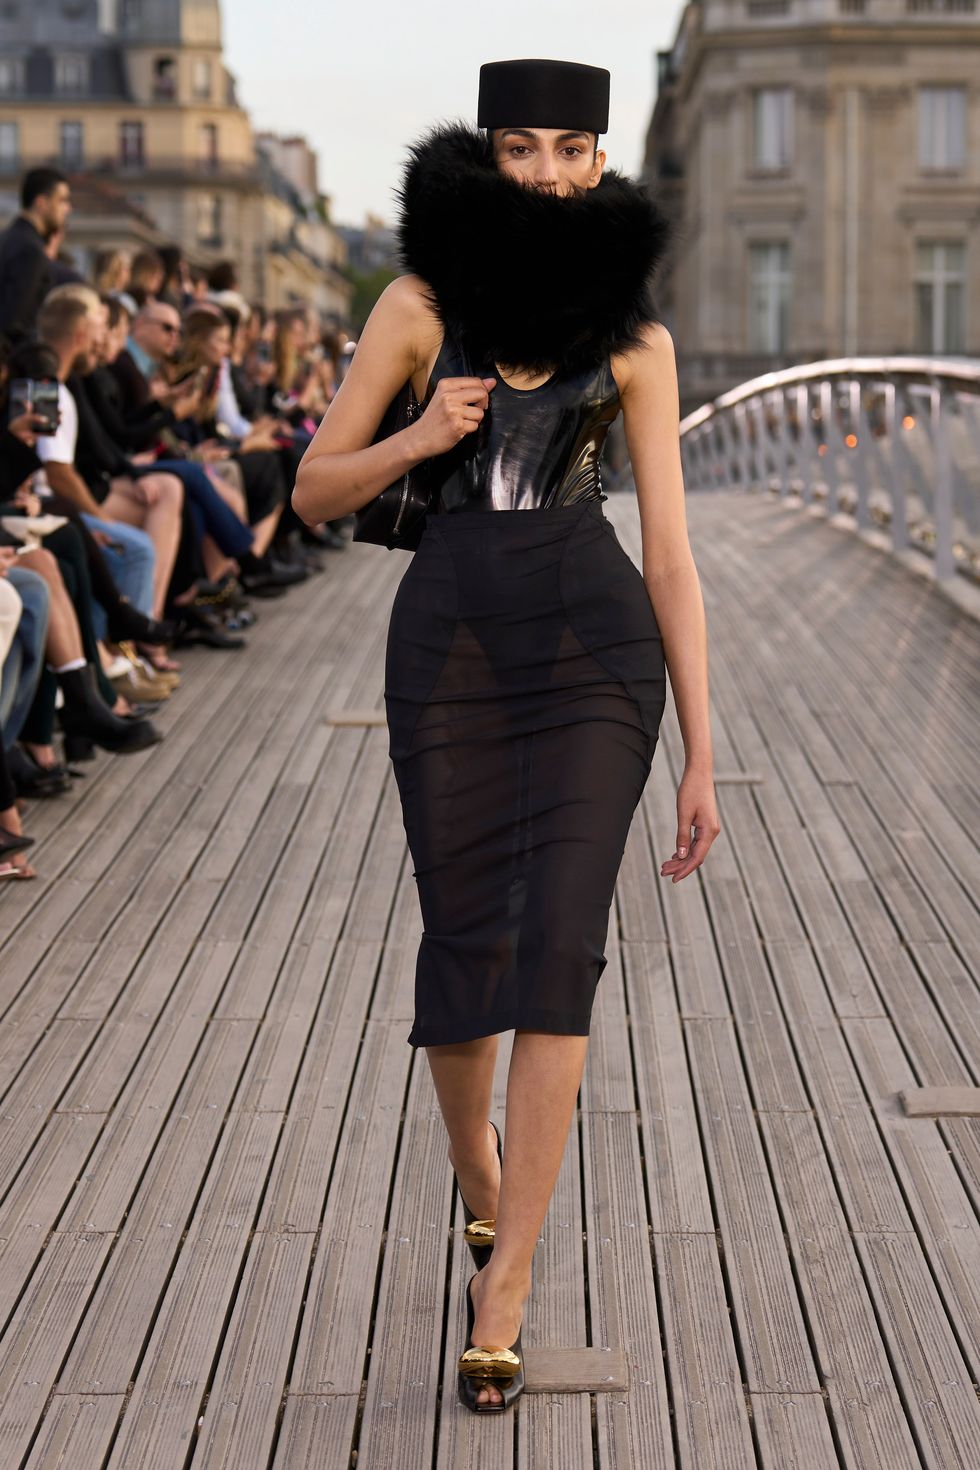 a woman wearing a black dress and a black hat walking on a wooden deck